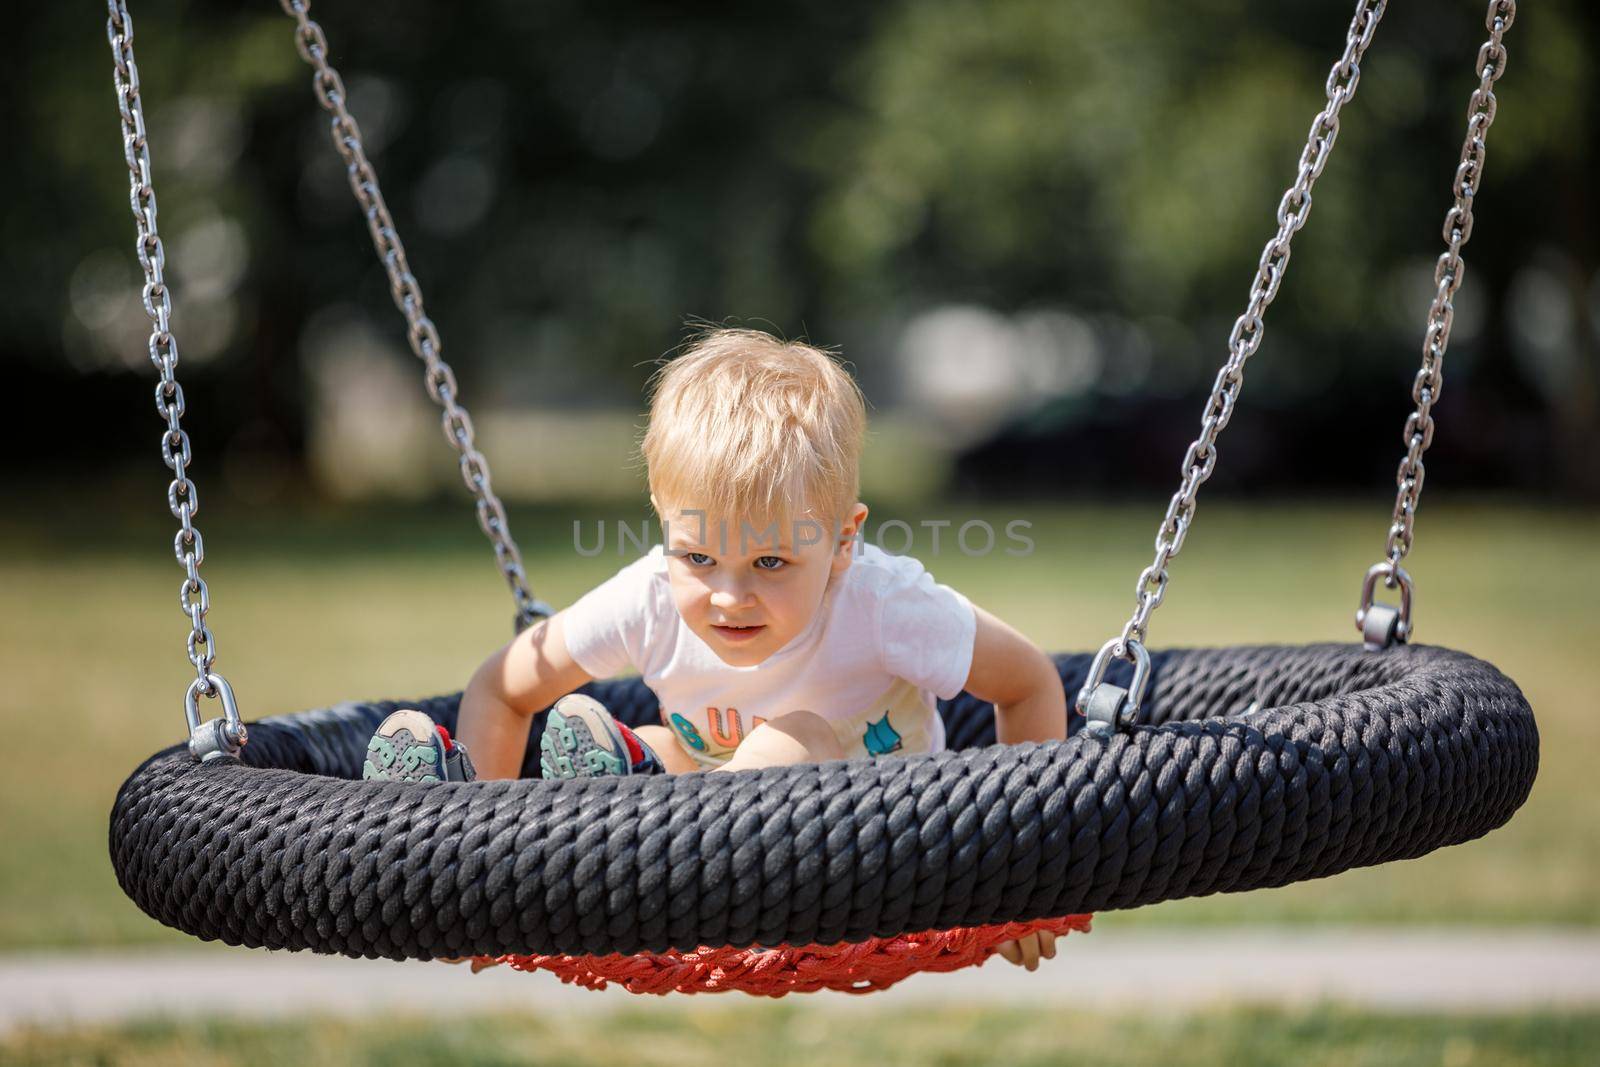 Little blonde boy playing happily on large nest swing at city playground. Round black and red seat for children's swing.